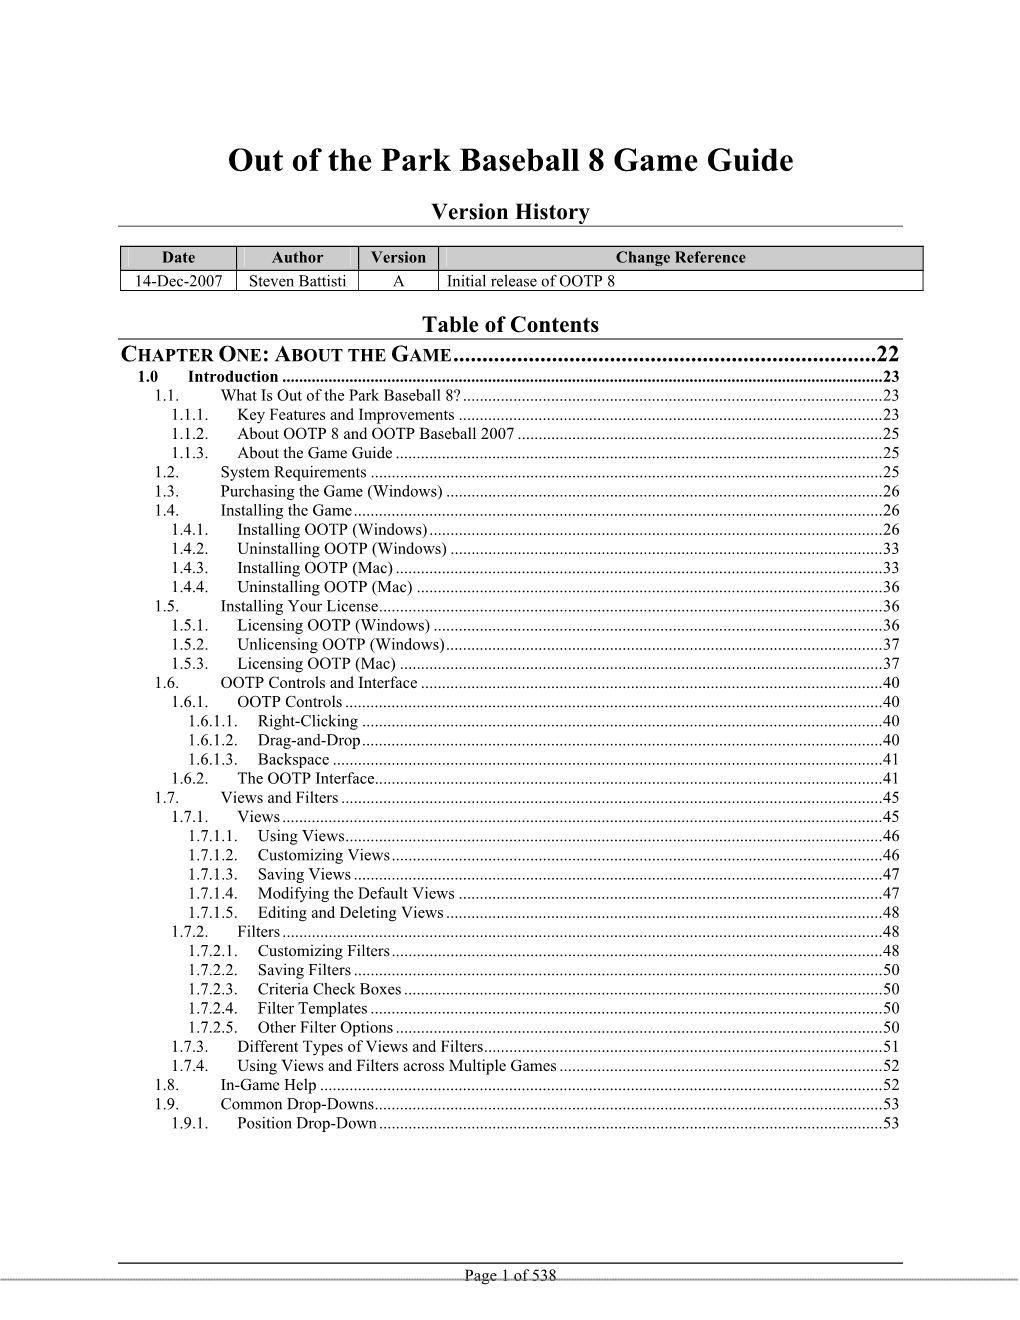 Out of the Park Baseball 8 Game Guide